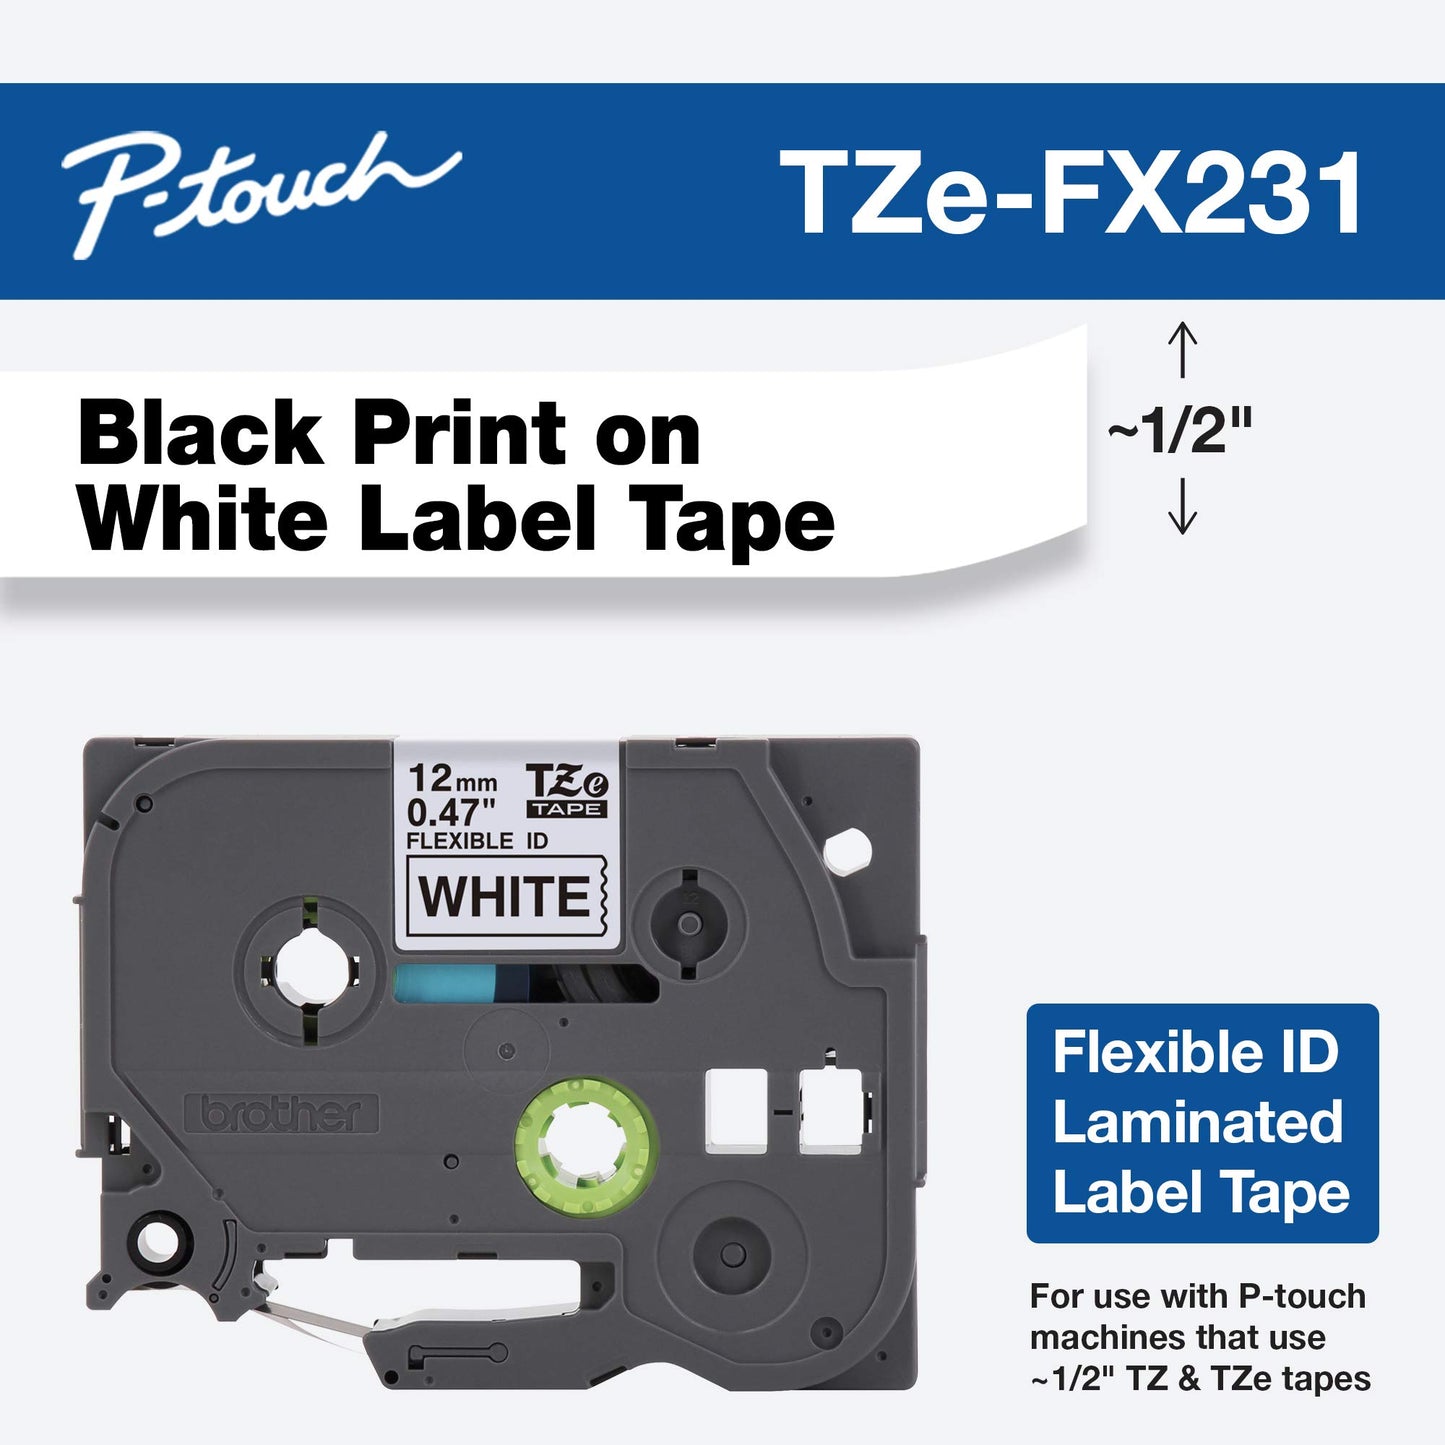 Brother Genuine P-touch TZE-334 Tape, 1/2" (0.47") Wide Standard Laminated Tape, Black on Gold, Laminated for Indoor or Outdoor Use, Water-Resistant, 0.47" x 26.2' (12mm x 8M), Single-Pack, TZE334, Gold on Black